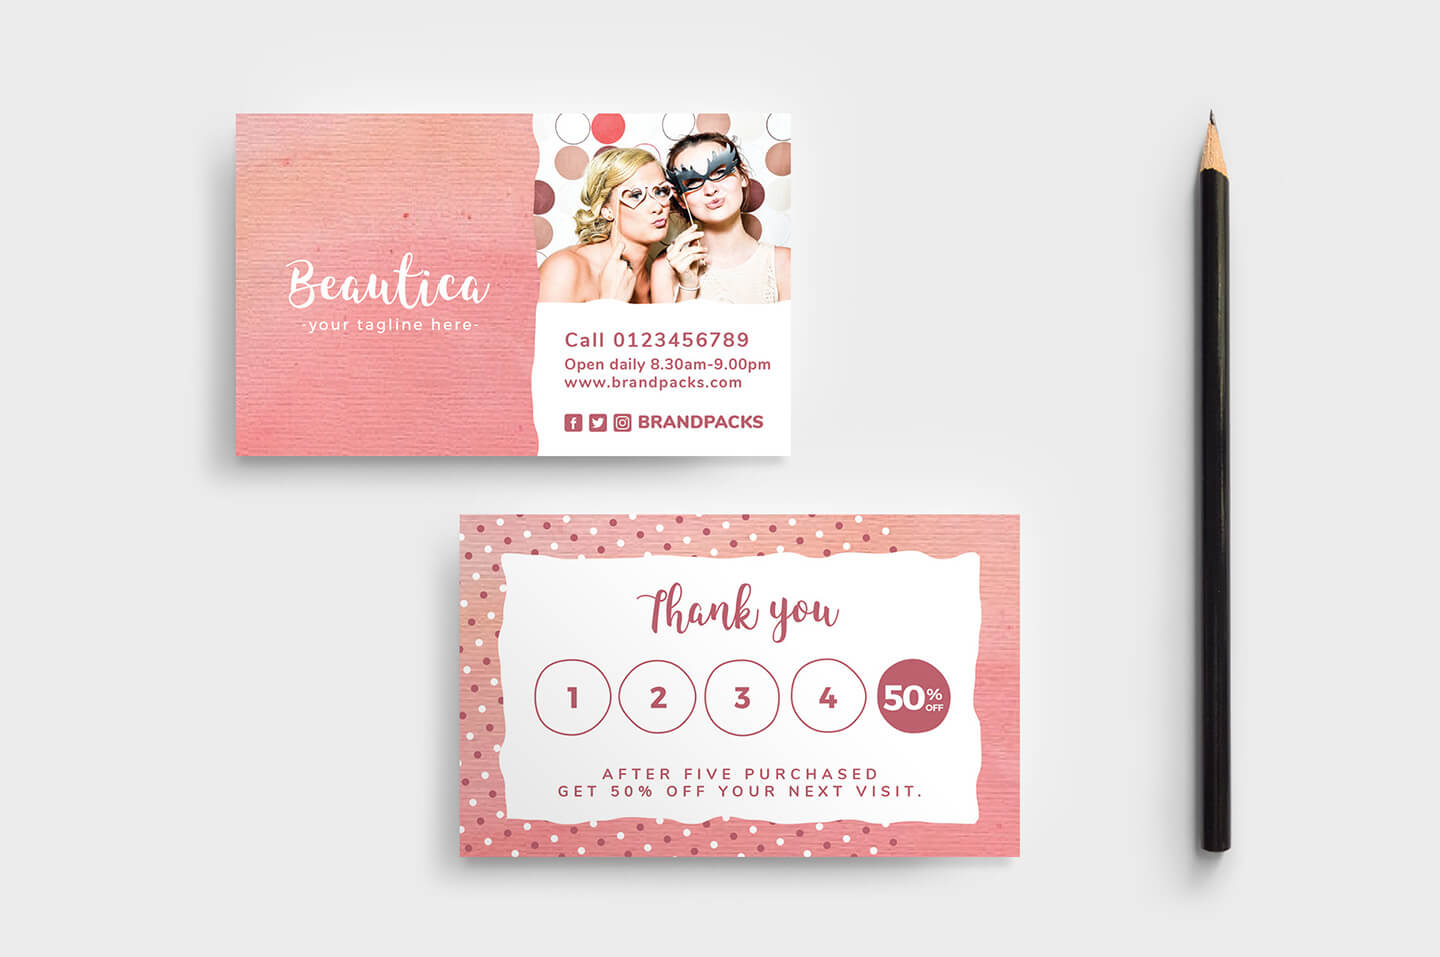 Free Loyalty Card Templates - Psd, Ai & Vector - Brandpacks With Regard To Customer Loyalty Card Template Free